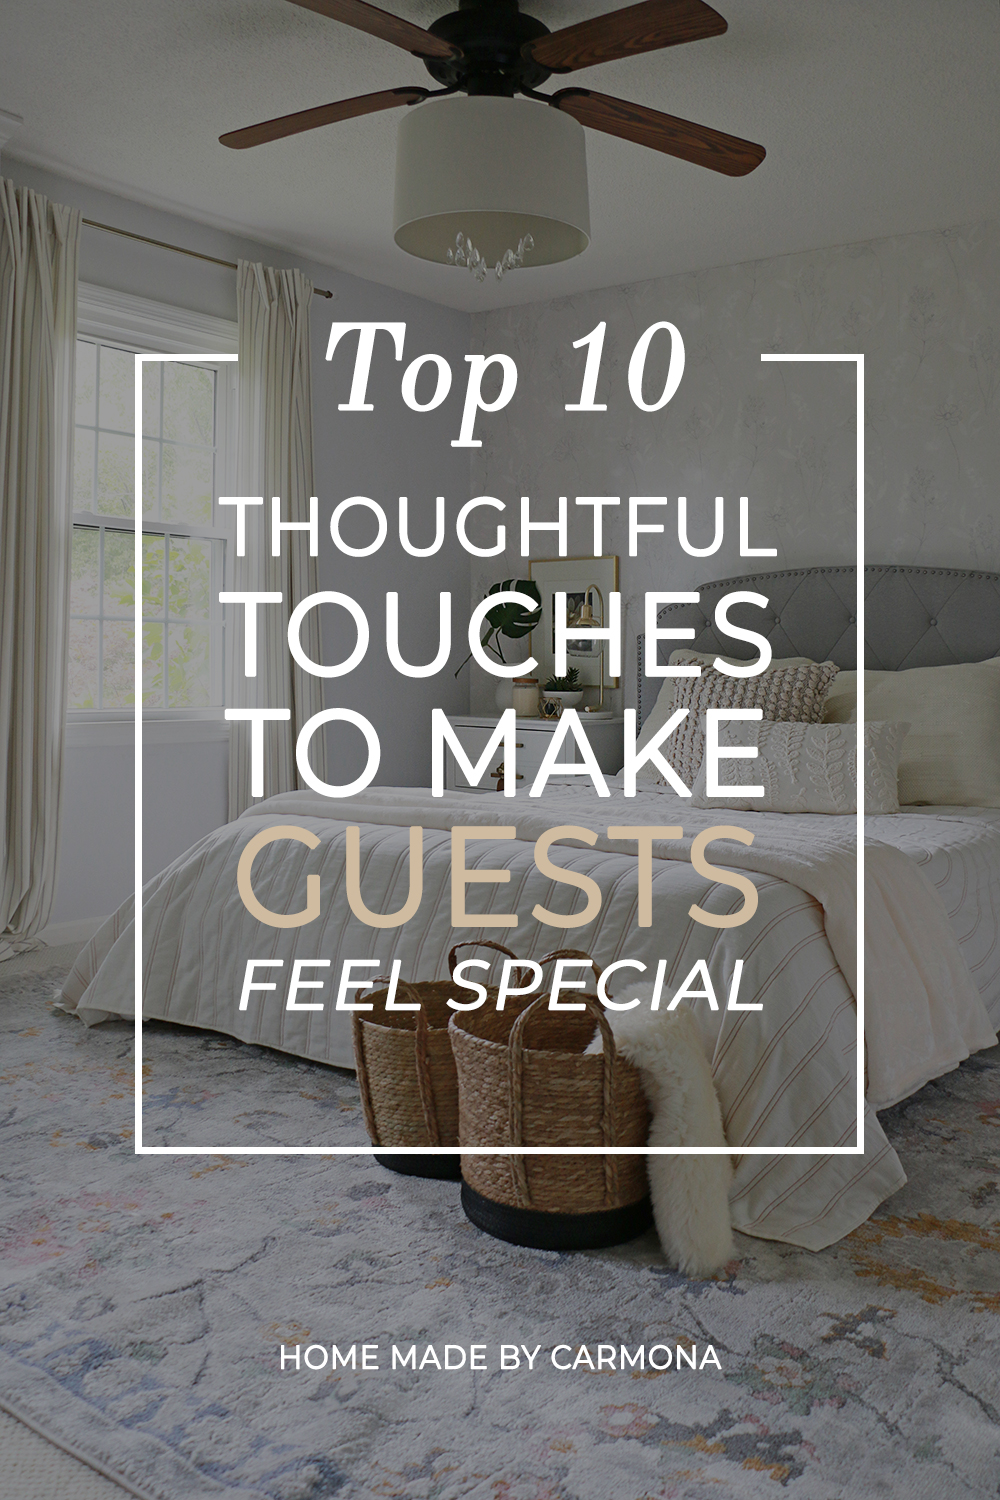 Title image - 10 thoughtful touches to make guest feel welcome